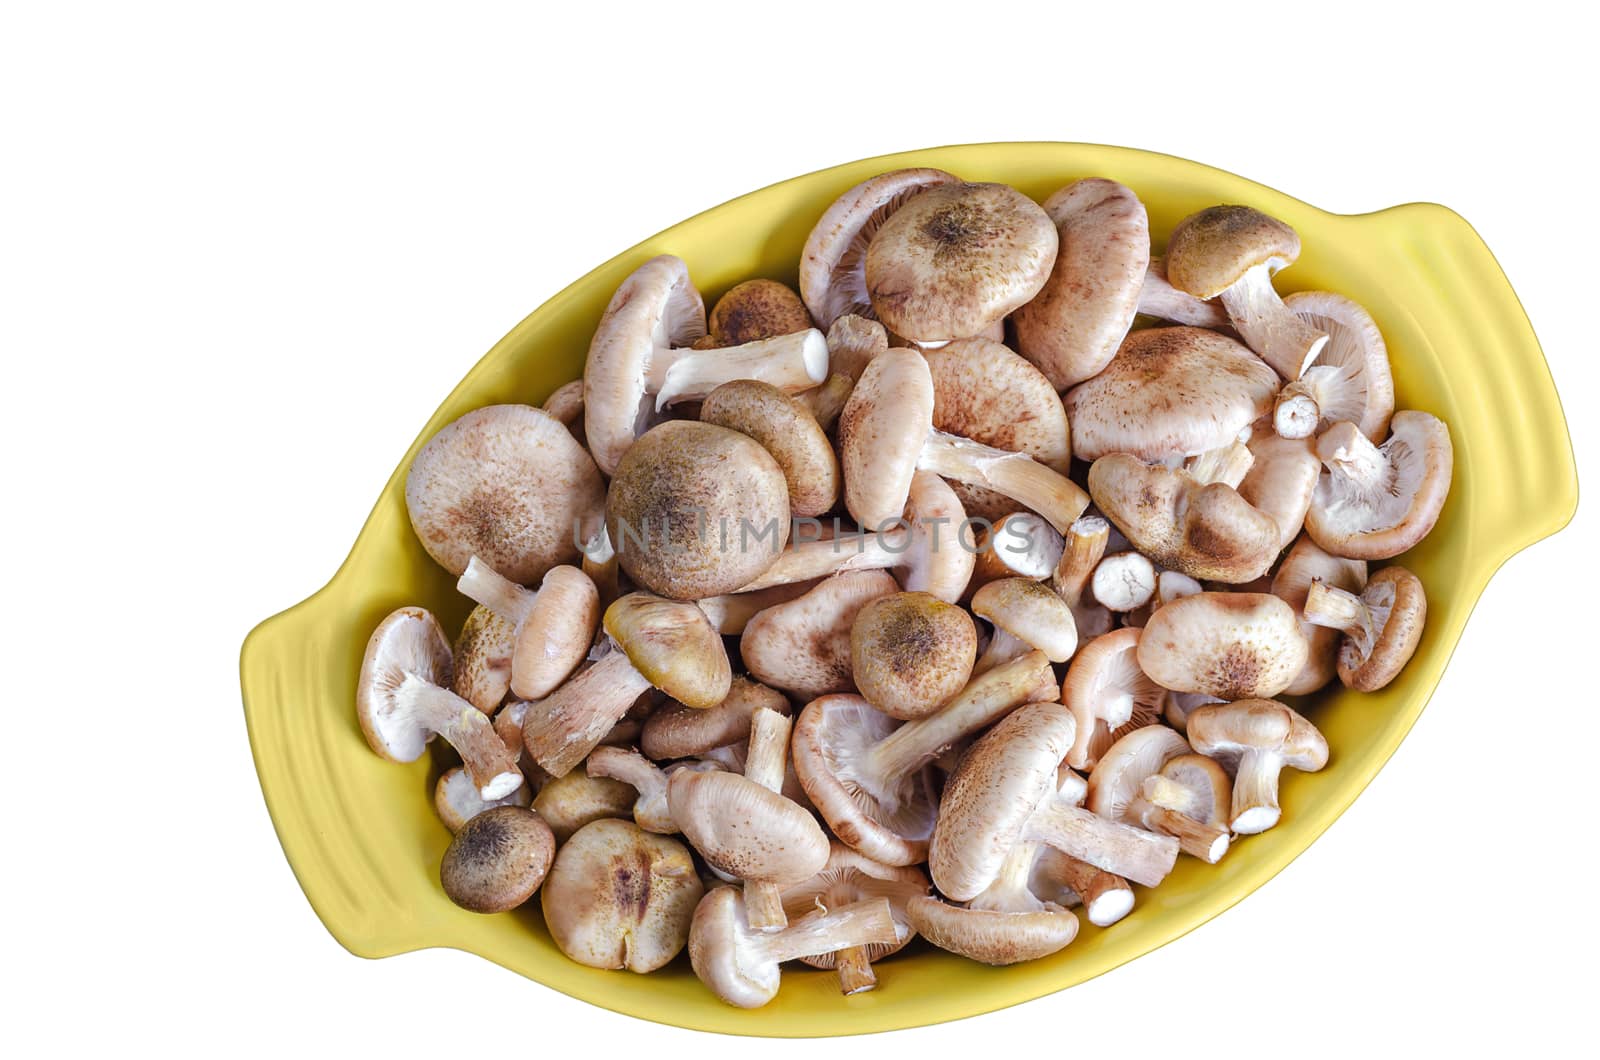 Raw fresh mushrooms in Dutch oven, on a white background by Gaina